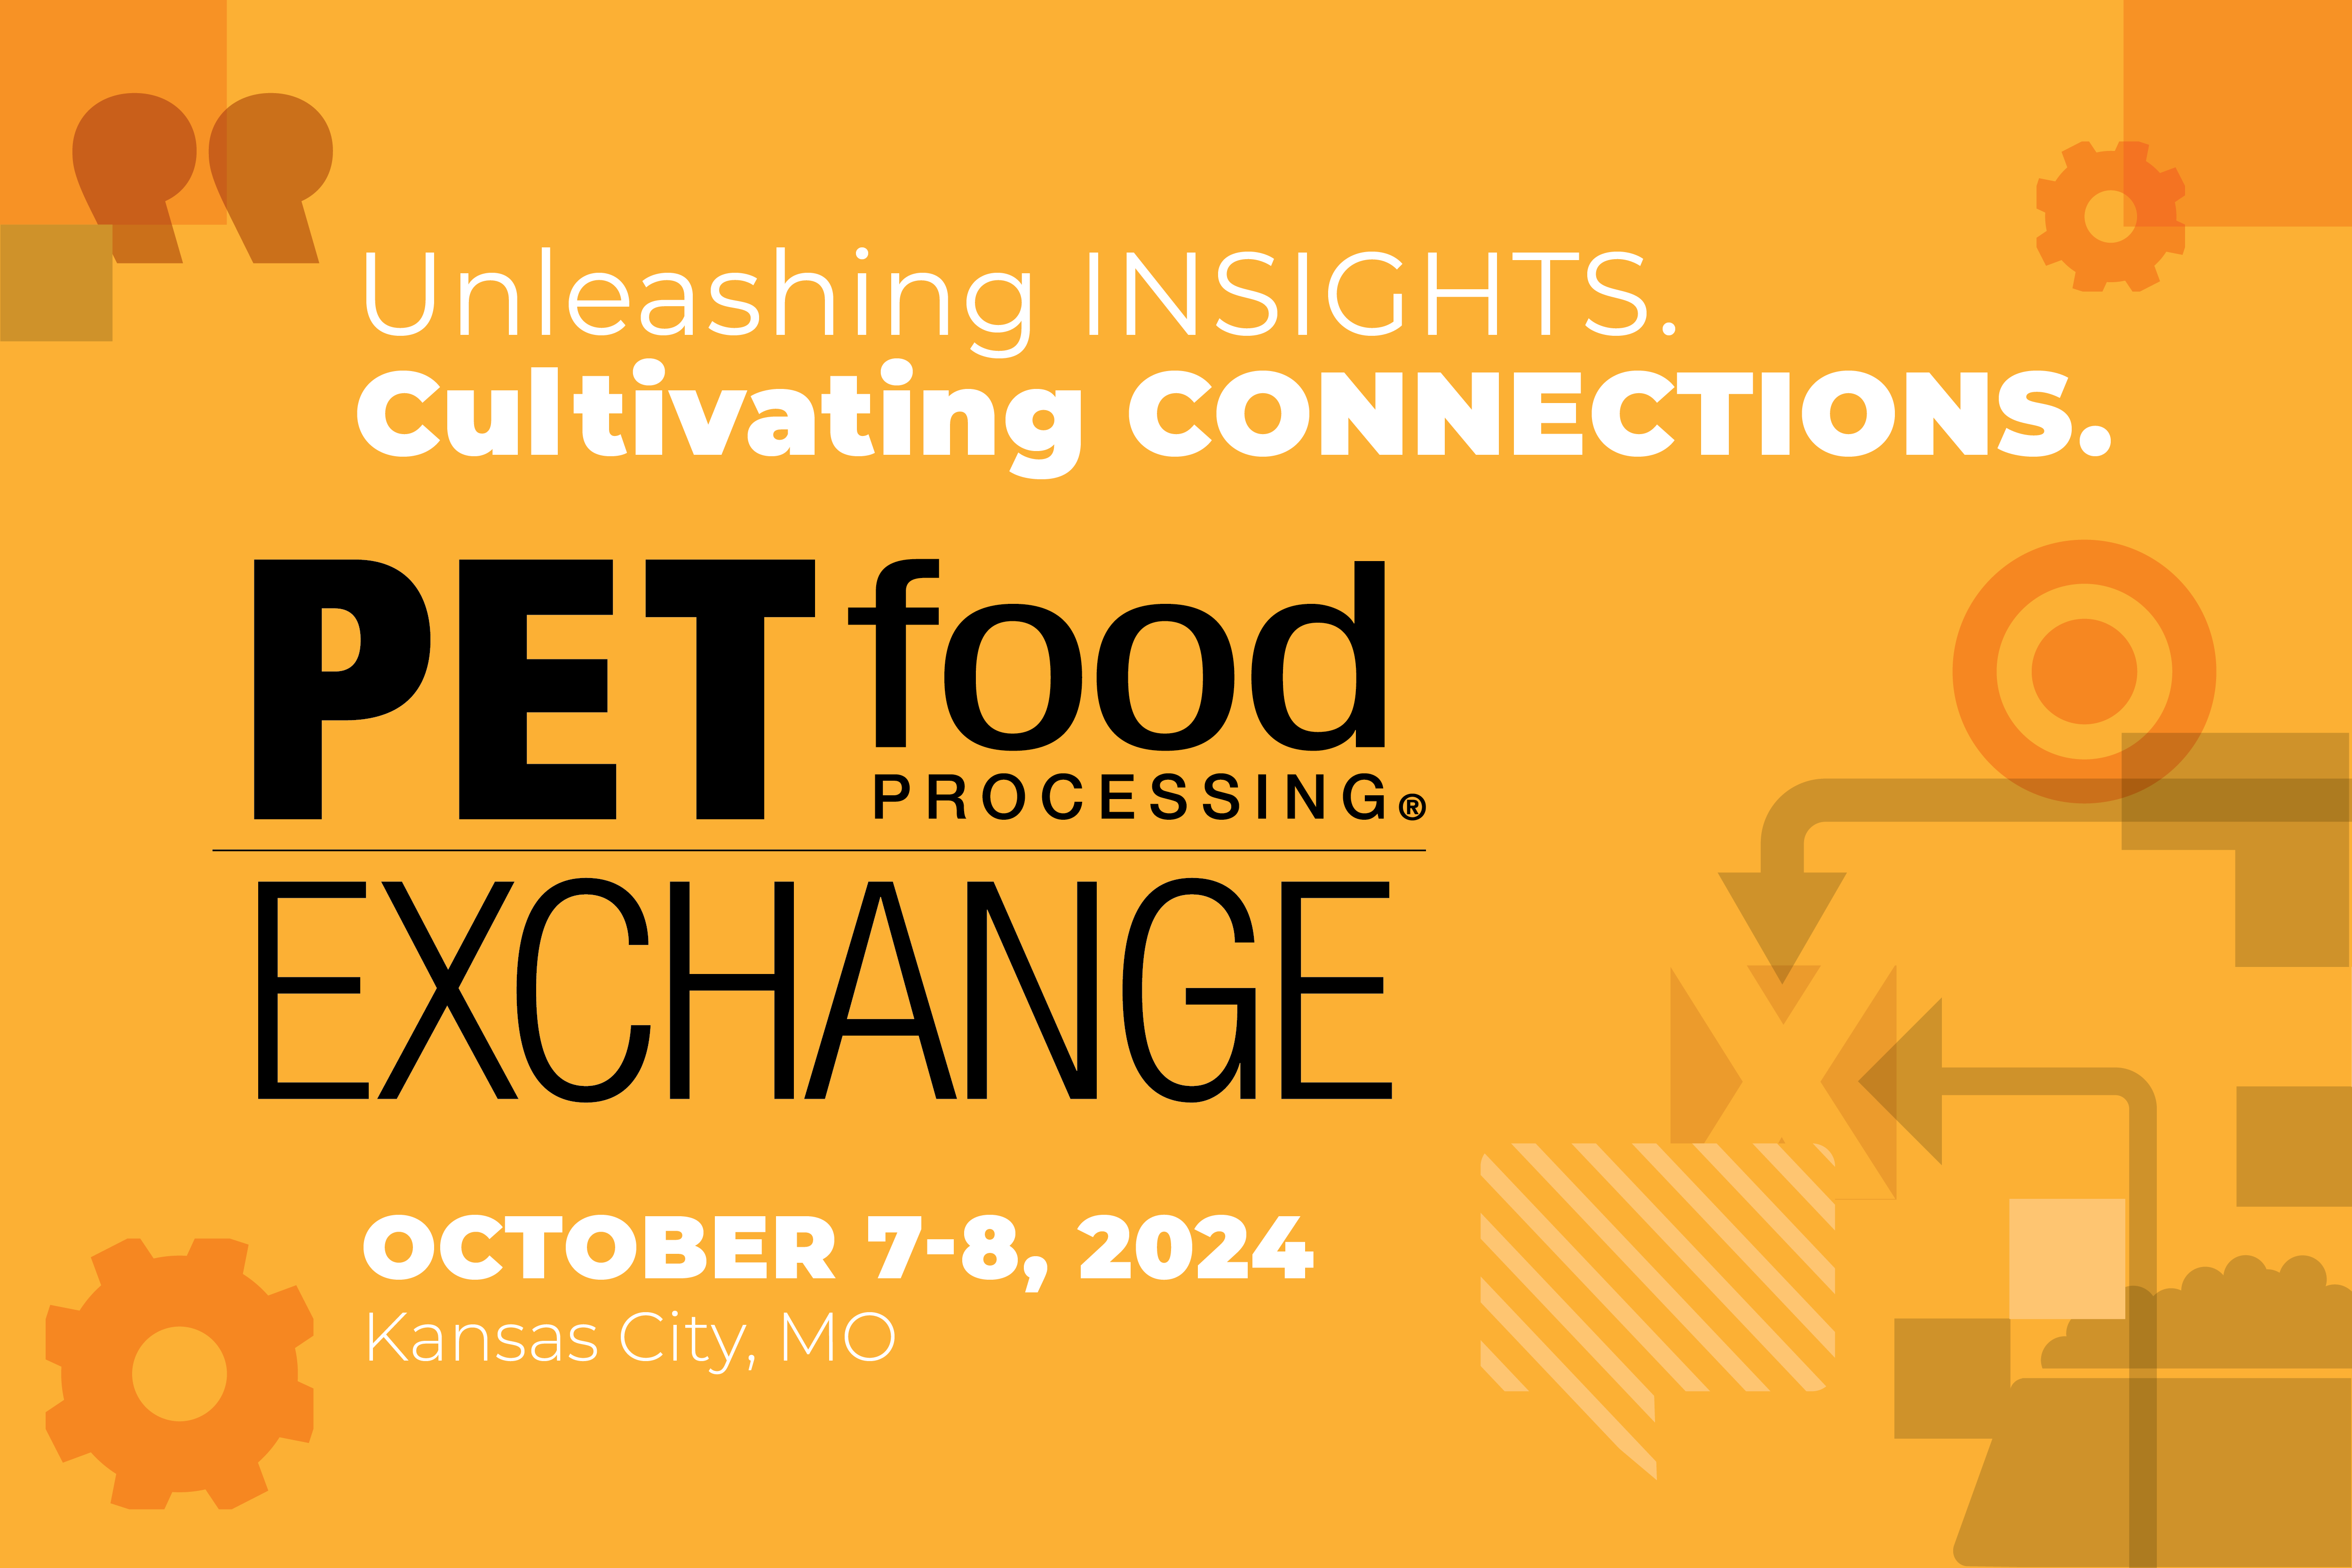 Pet Food Processing to launch networking event